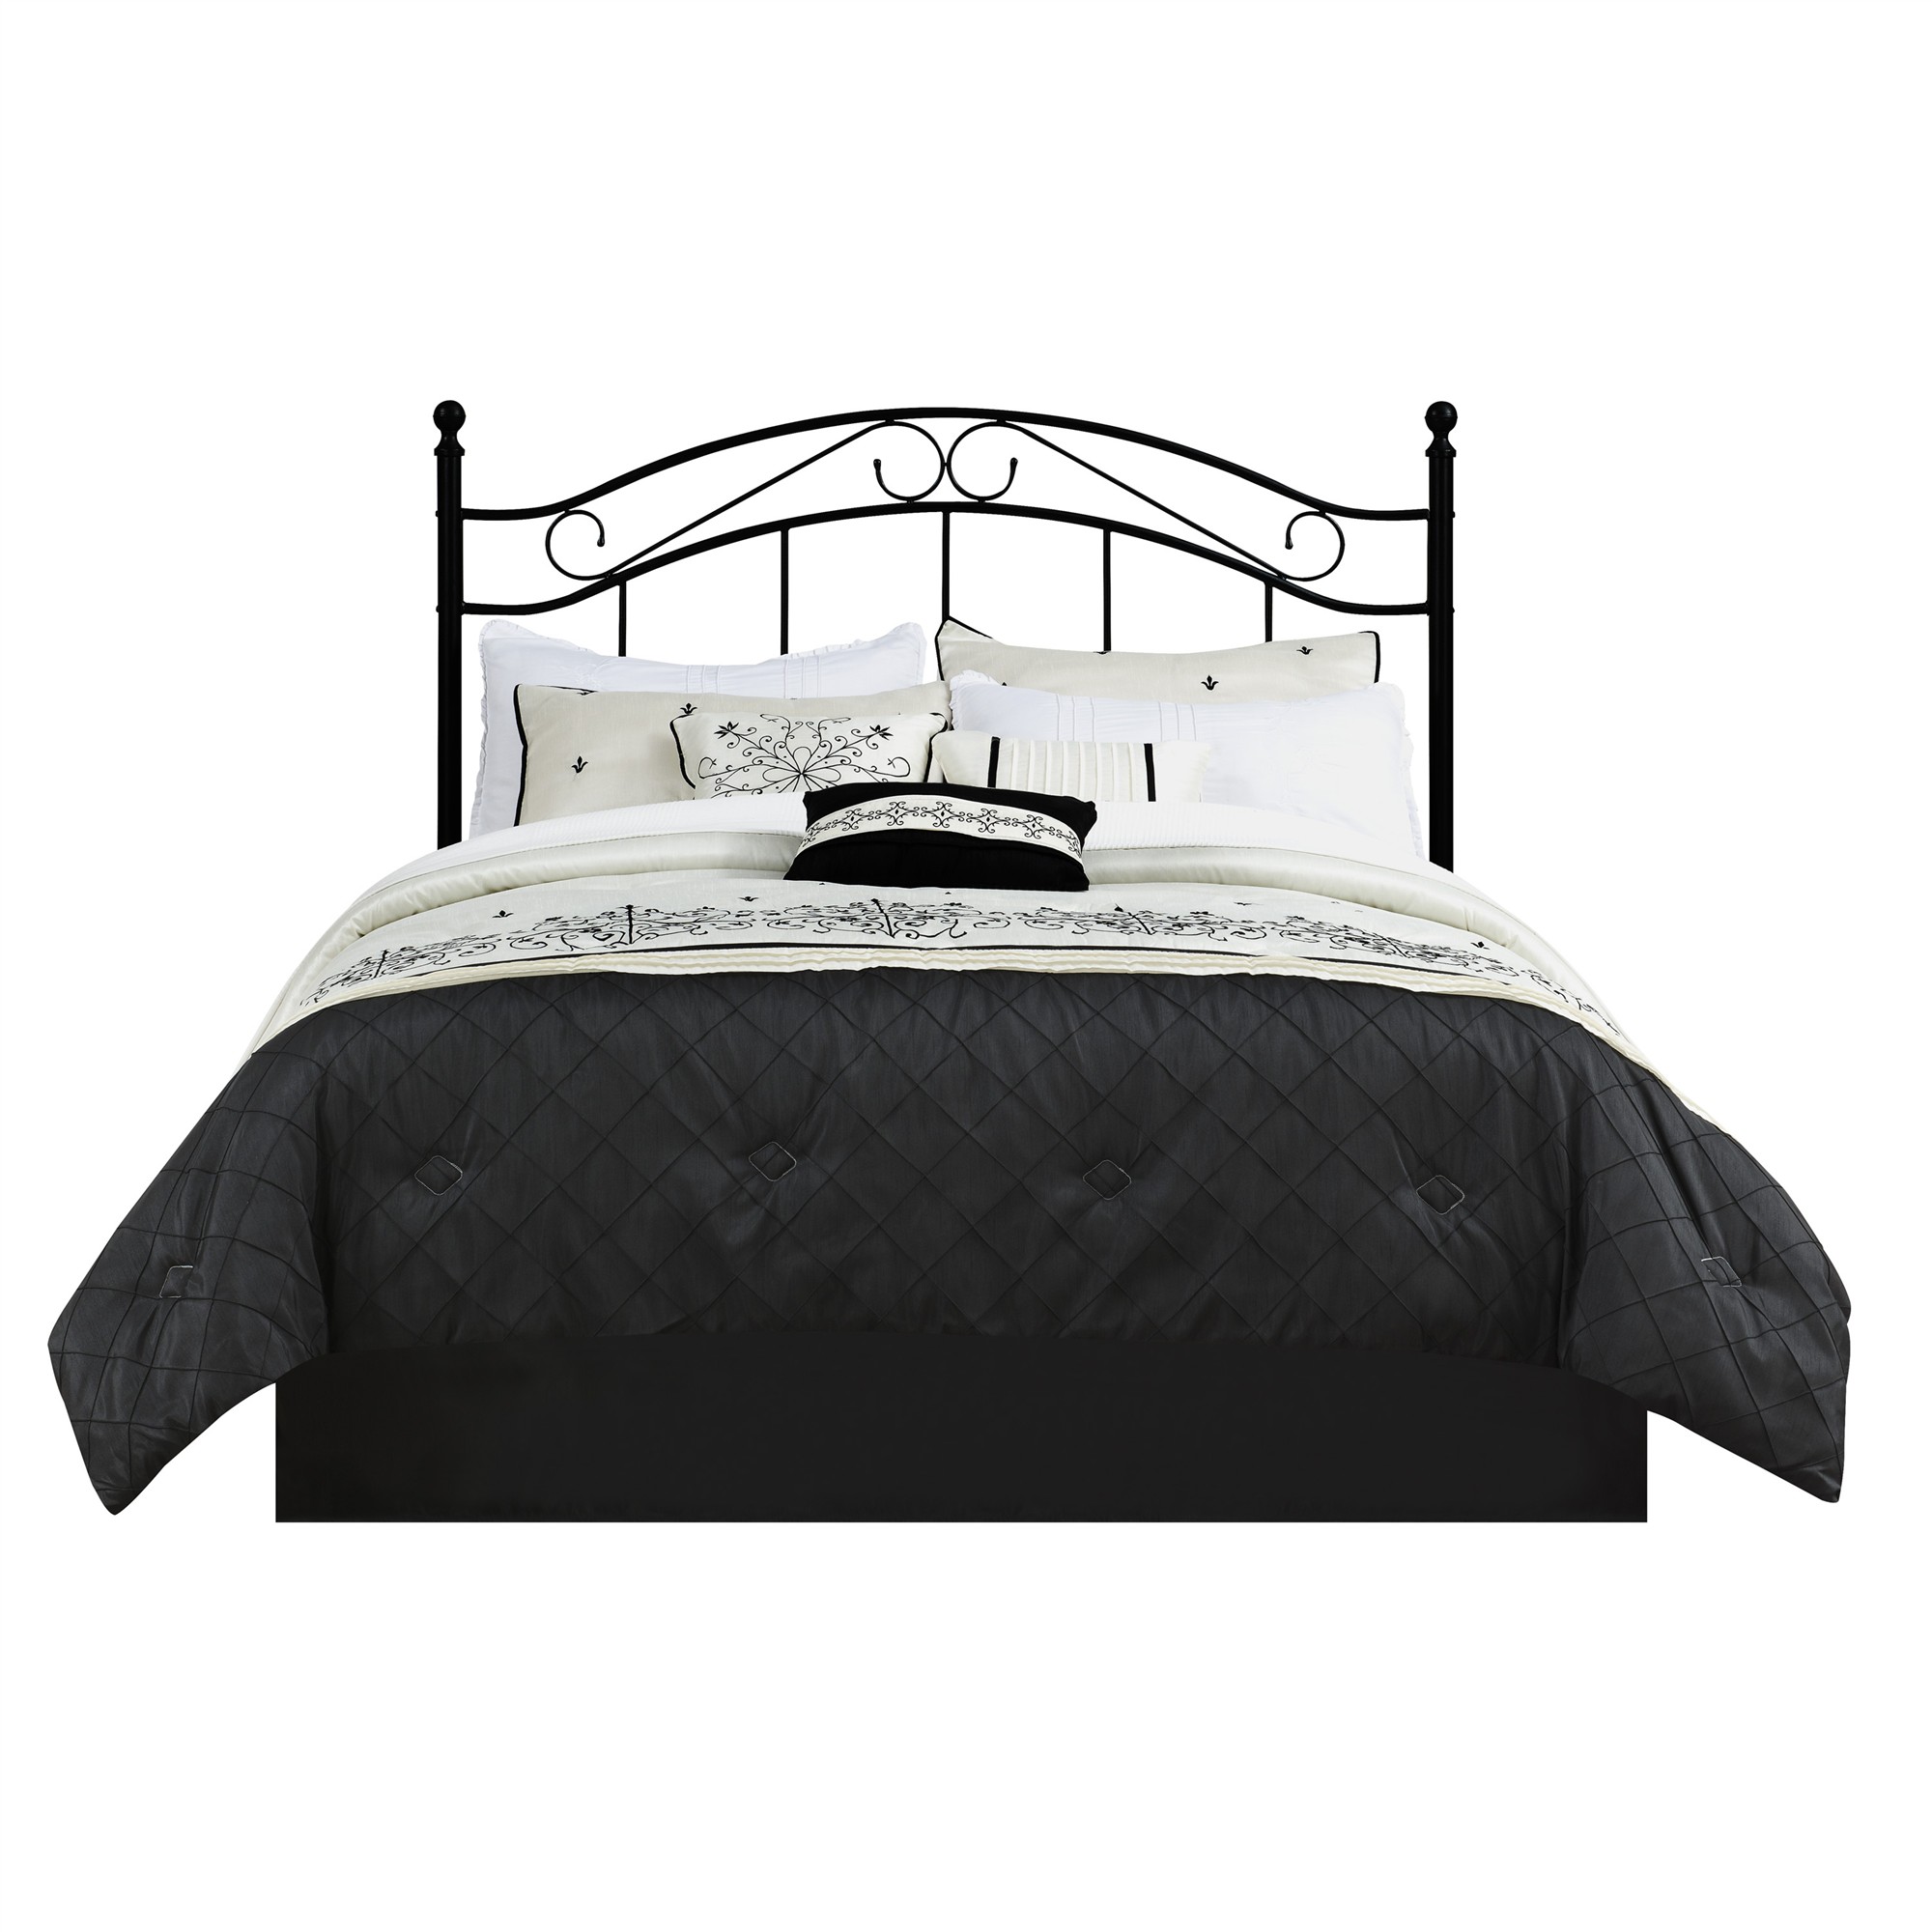 Mainstays Full/Queen Metal Headboard with Delicate Detailing, Black - image 3 of 8